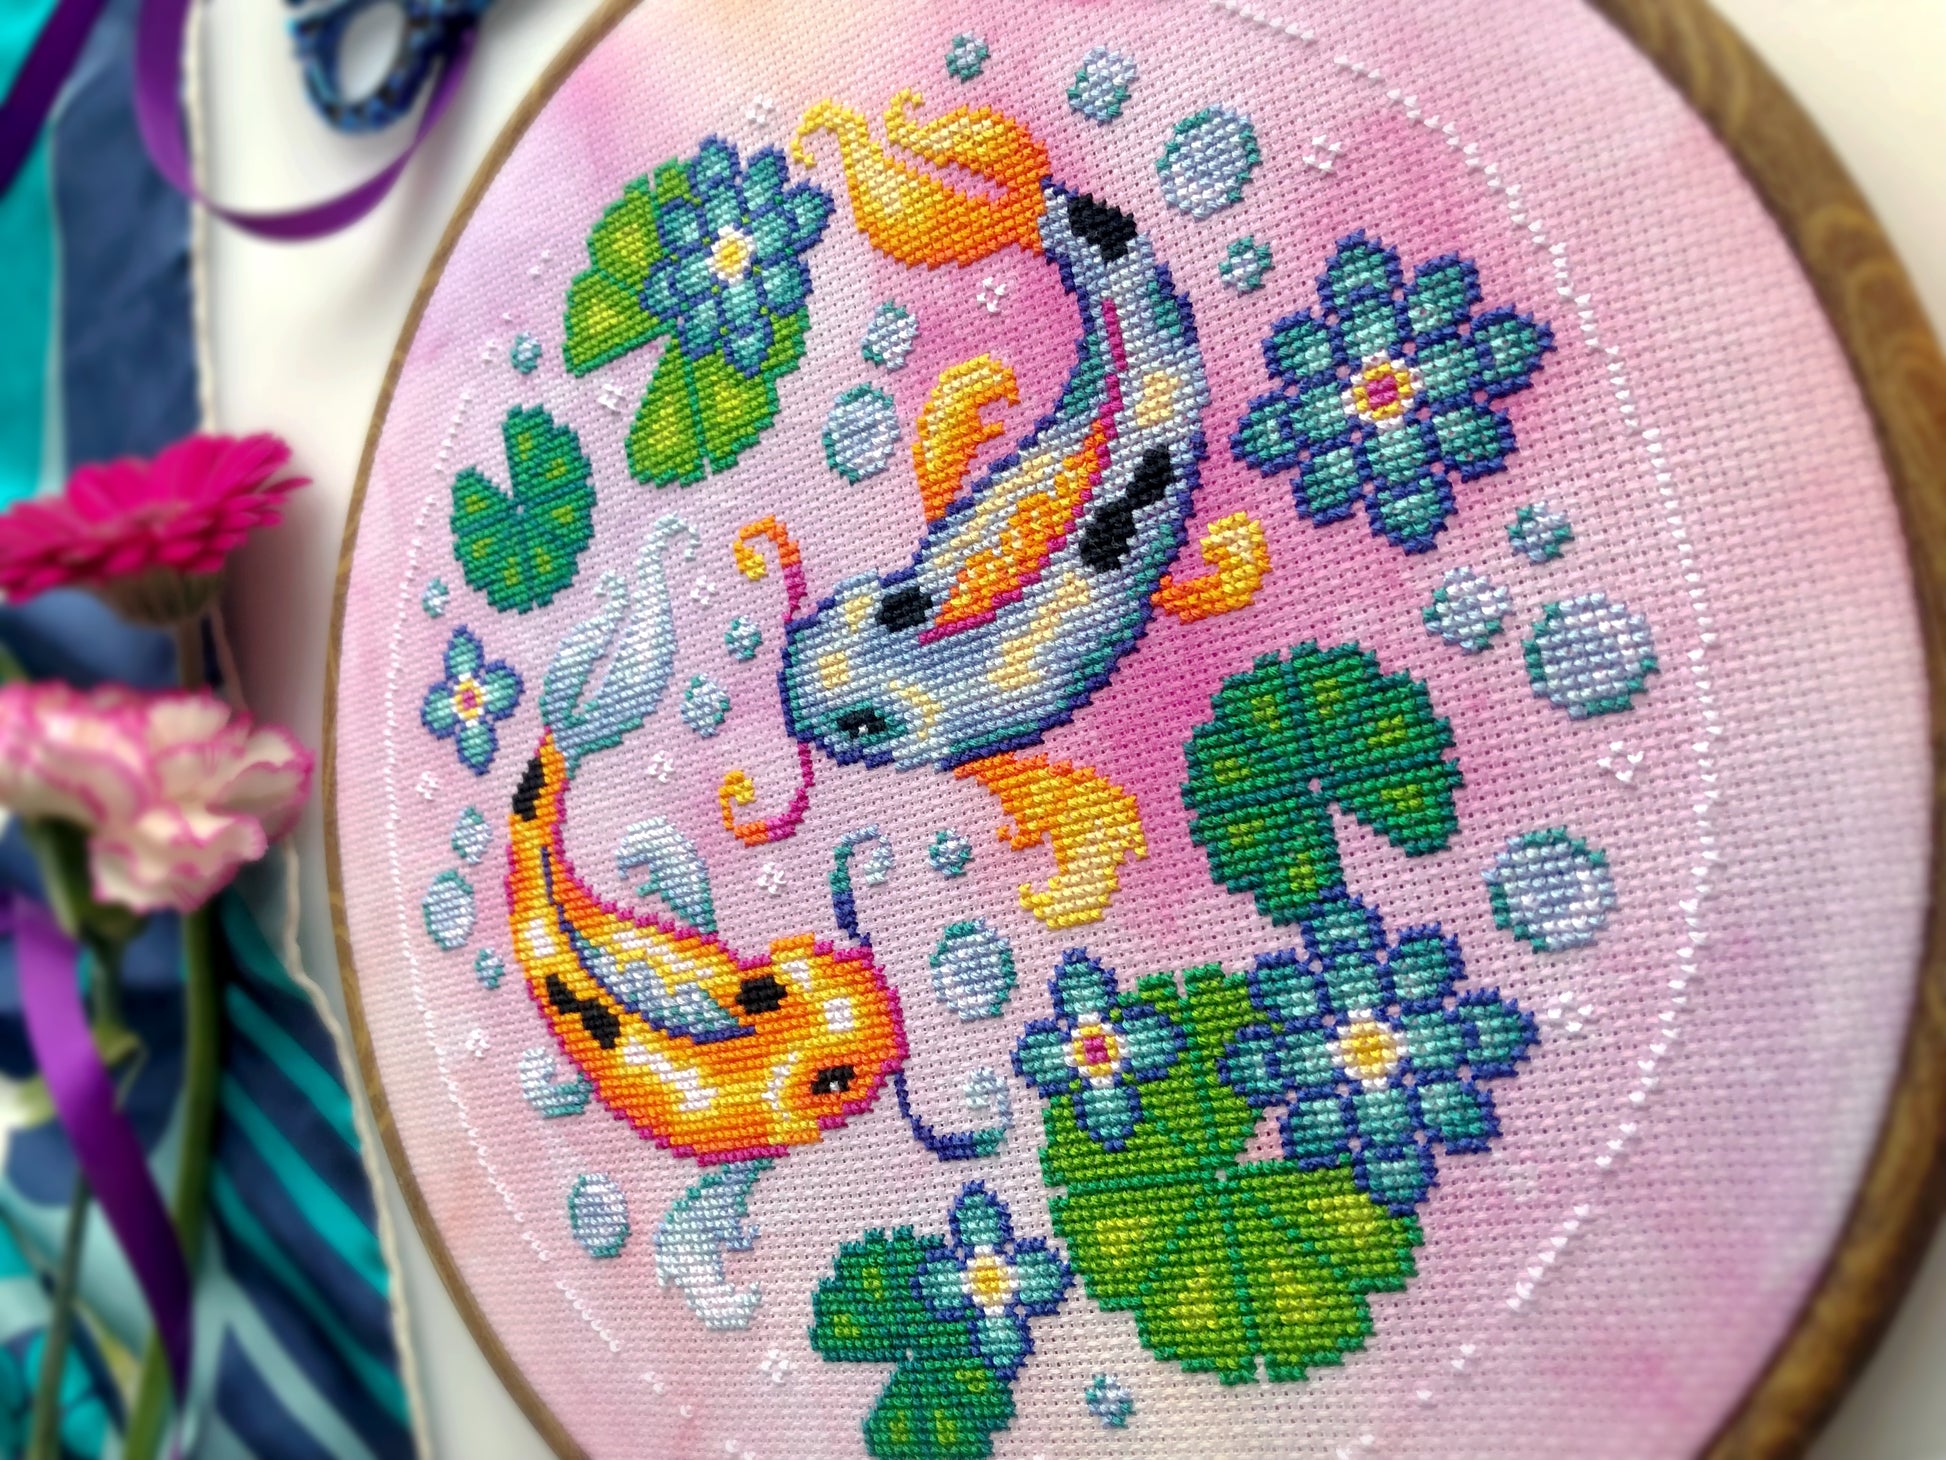 Closeup of Koi Fish cross stitch pattern. Right side is most visible. Finished piece is of medium size. Colors are very bright, and are green, blue, orange, pink and yellow. There are two fish, surrounded by lotus leaves and flowers.